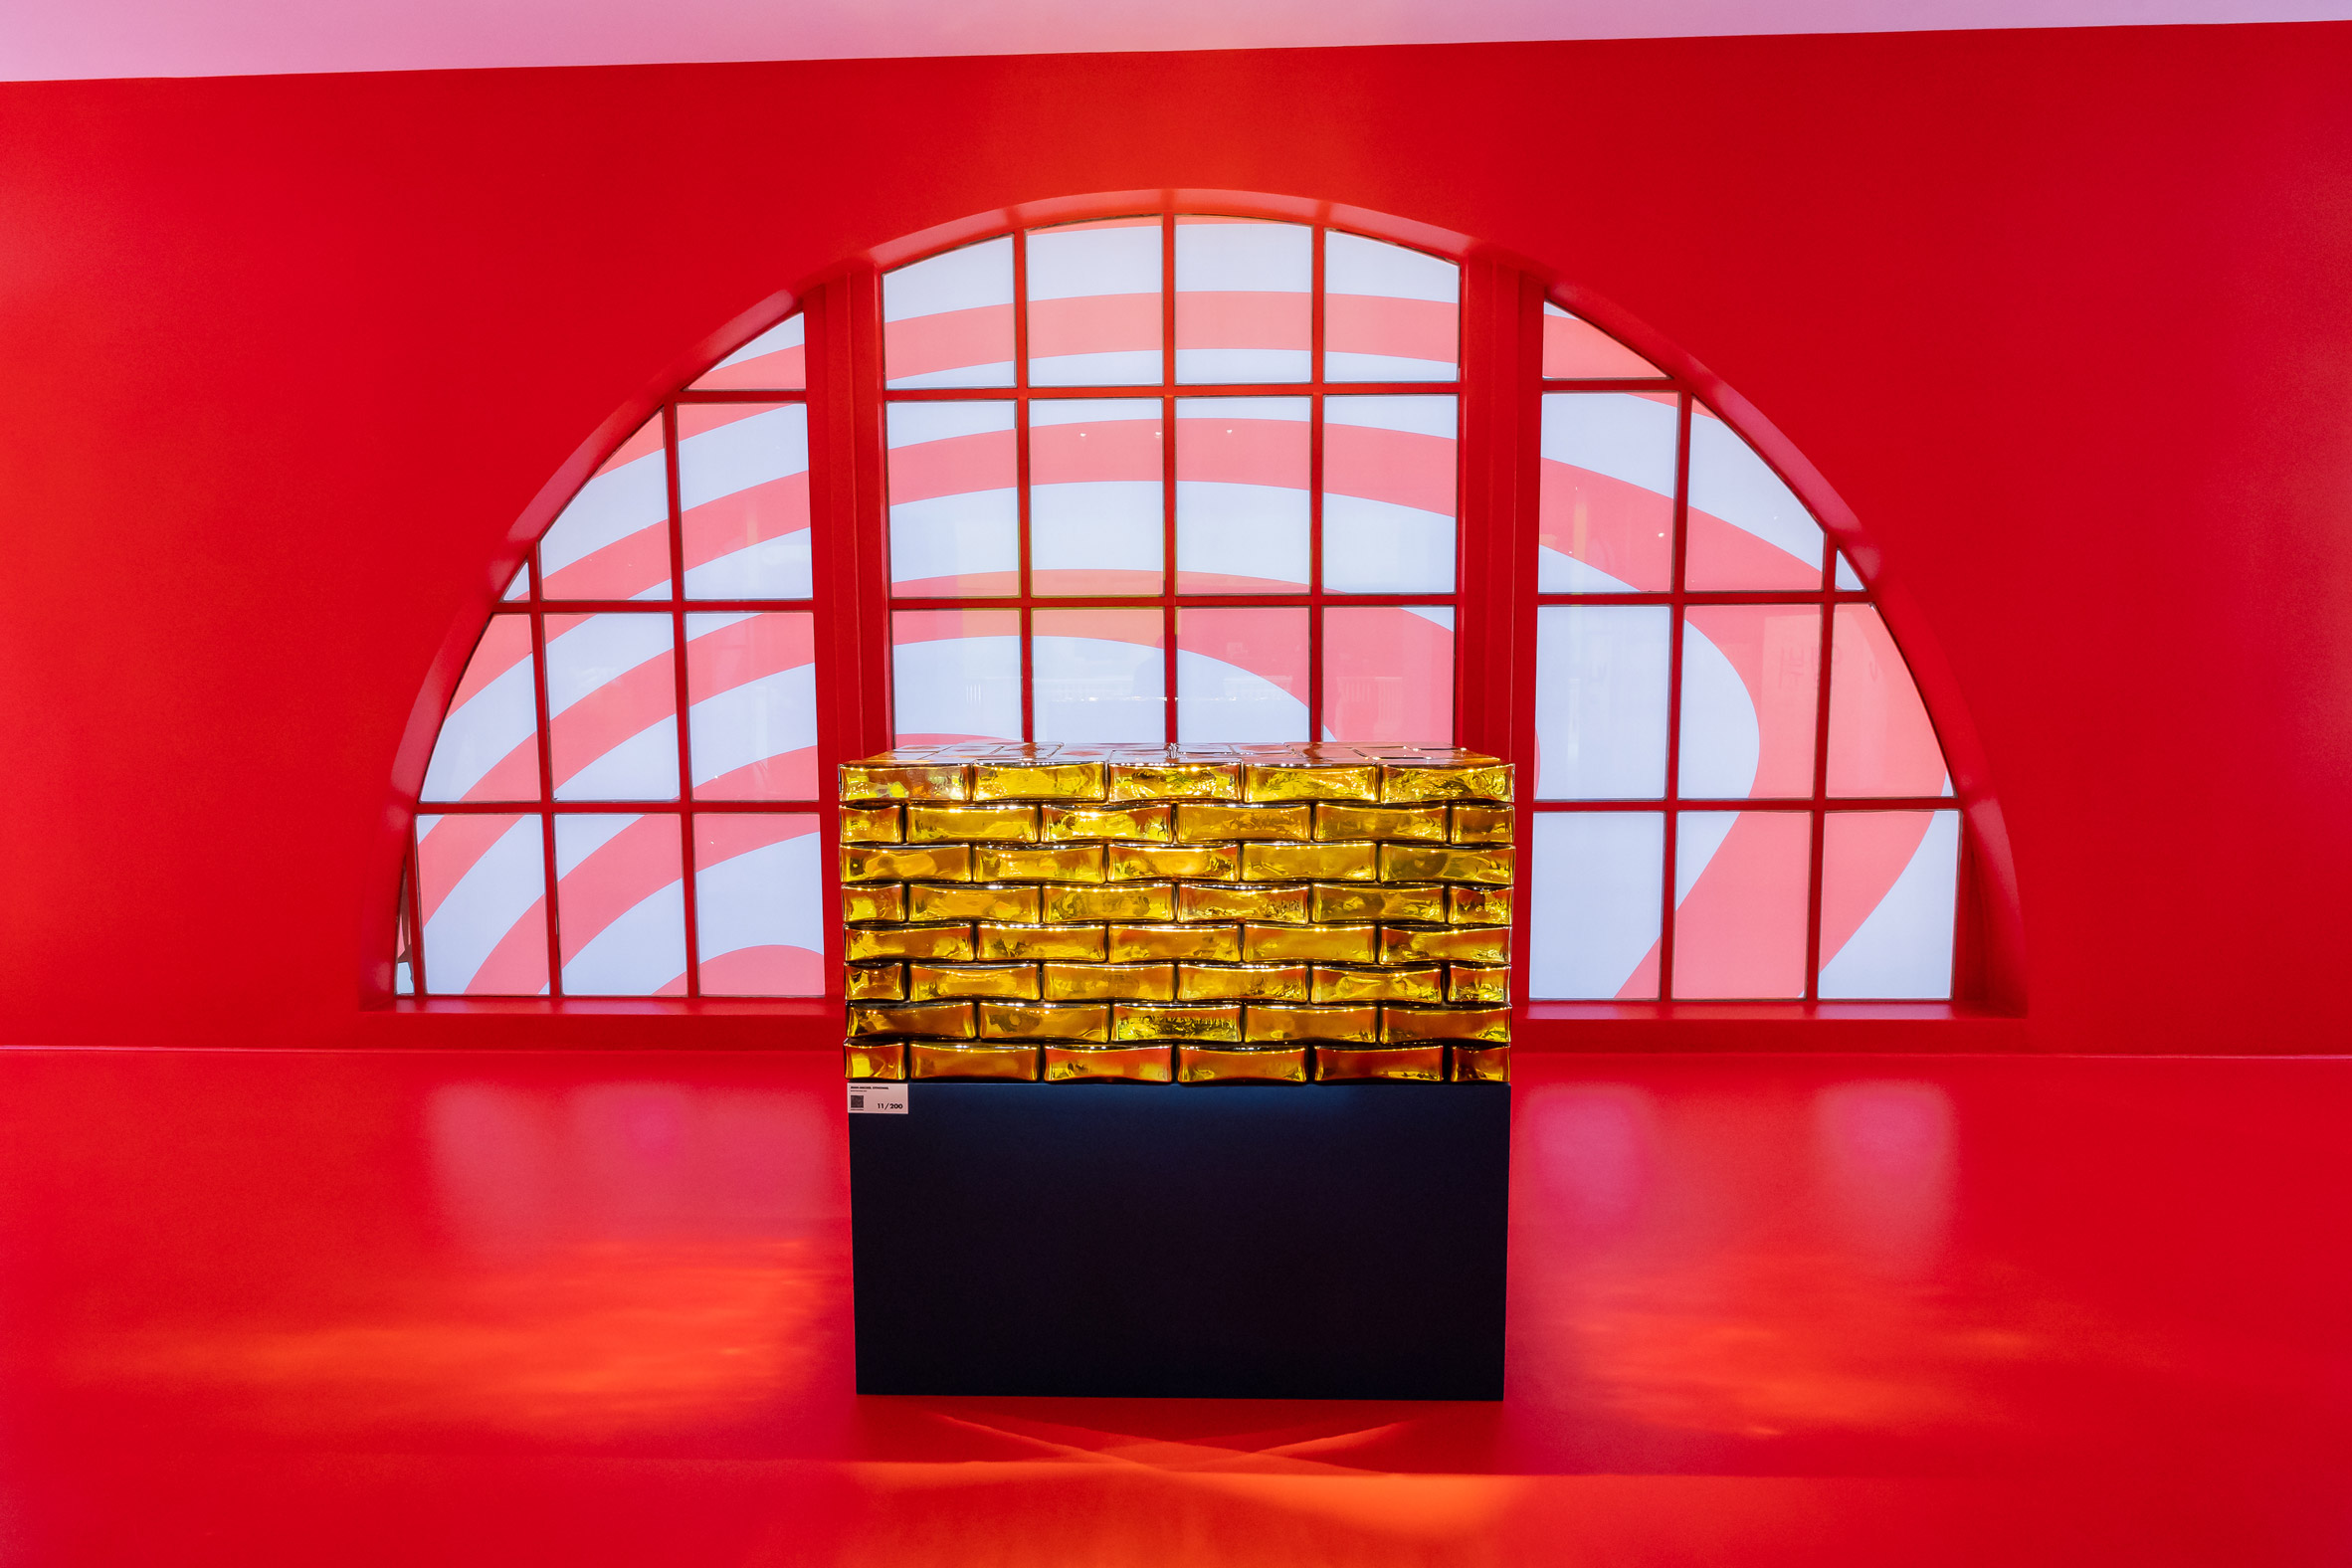 Louis Vuitton's '200 Trunks 200 Visionaries' Opens in New York